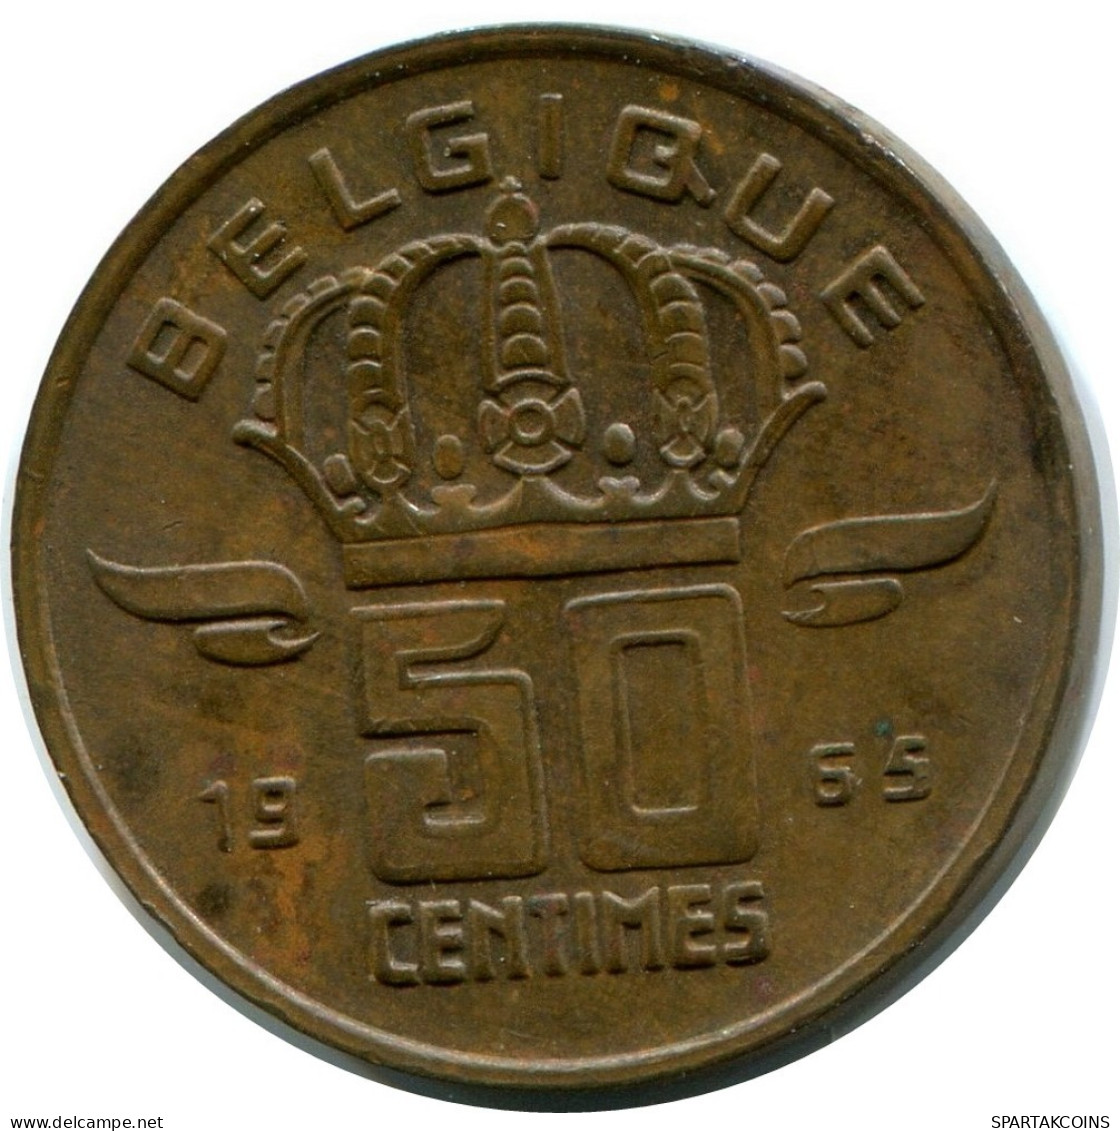 50 CENTIMES 1965 FRENCH Text BELGIUM Coin #AW923.U.A - 50 Centimes